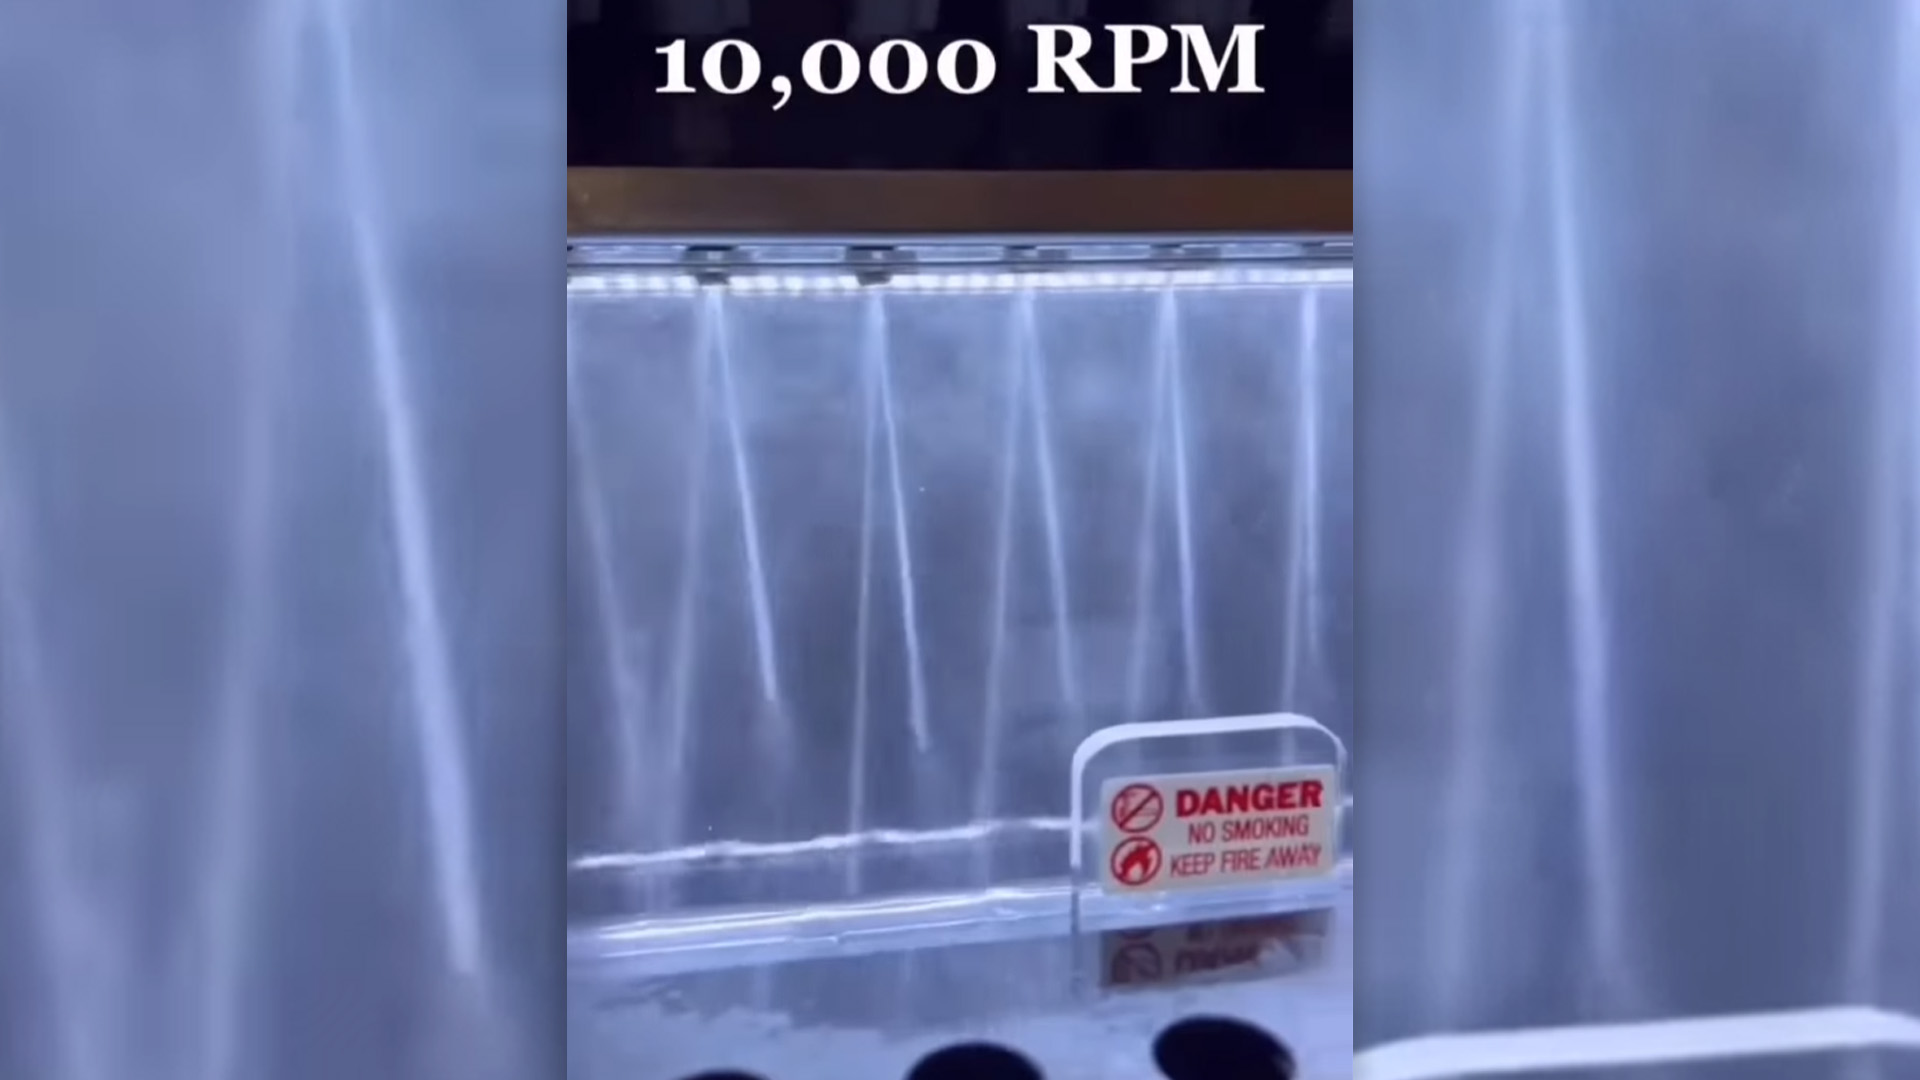 See How Fast Fuel Injectors Fire at 10,000 RPM in This Incredible Test Video